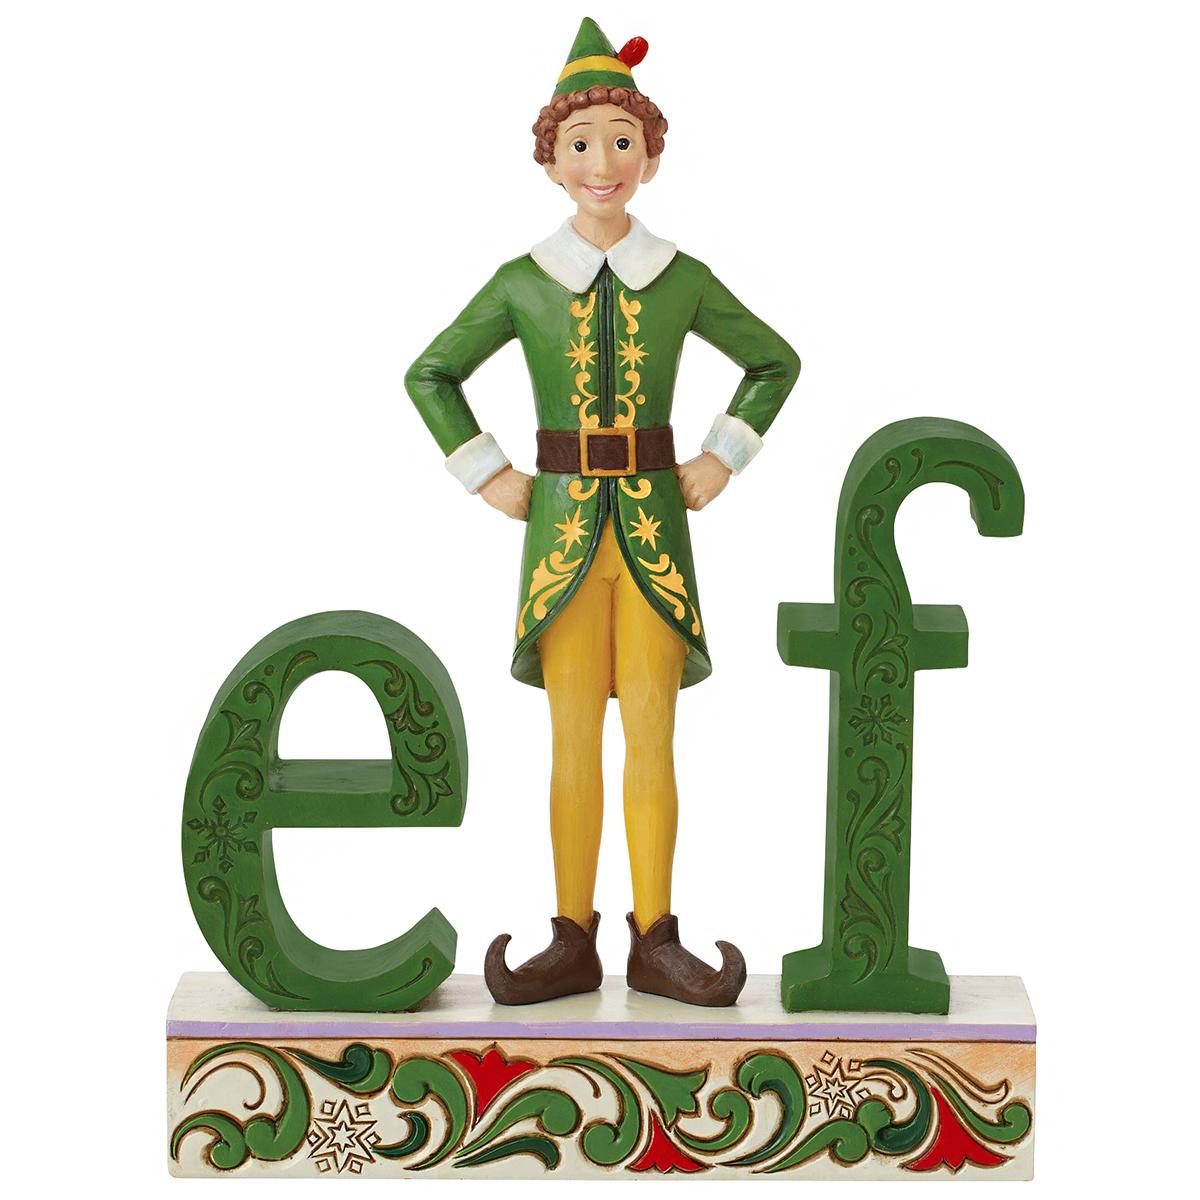 Buddy Standing As Letter L In Elf Jim Shore Figure